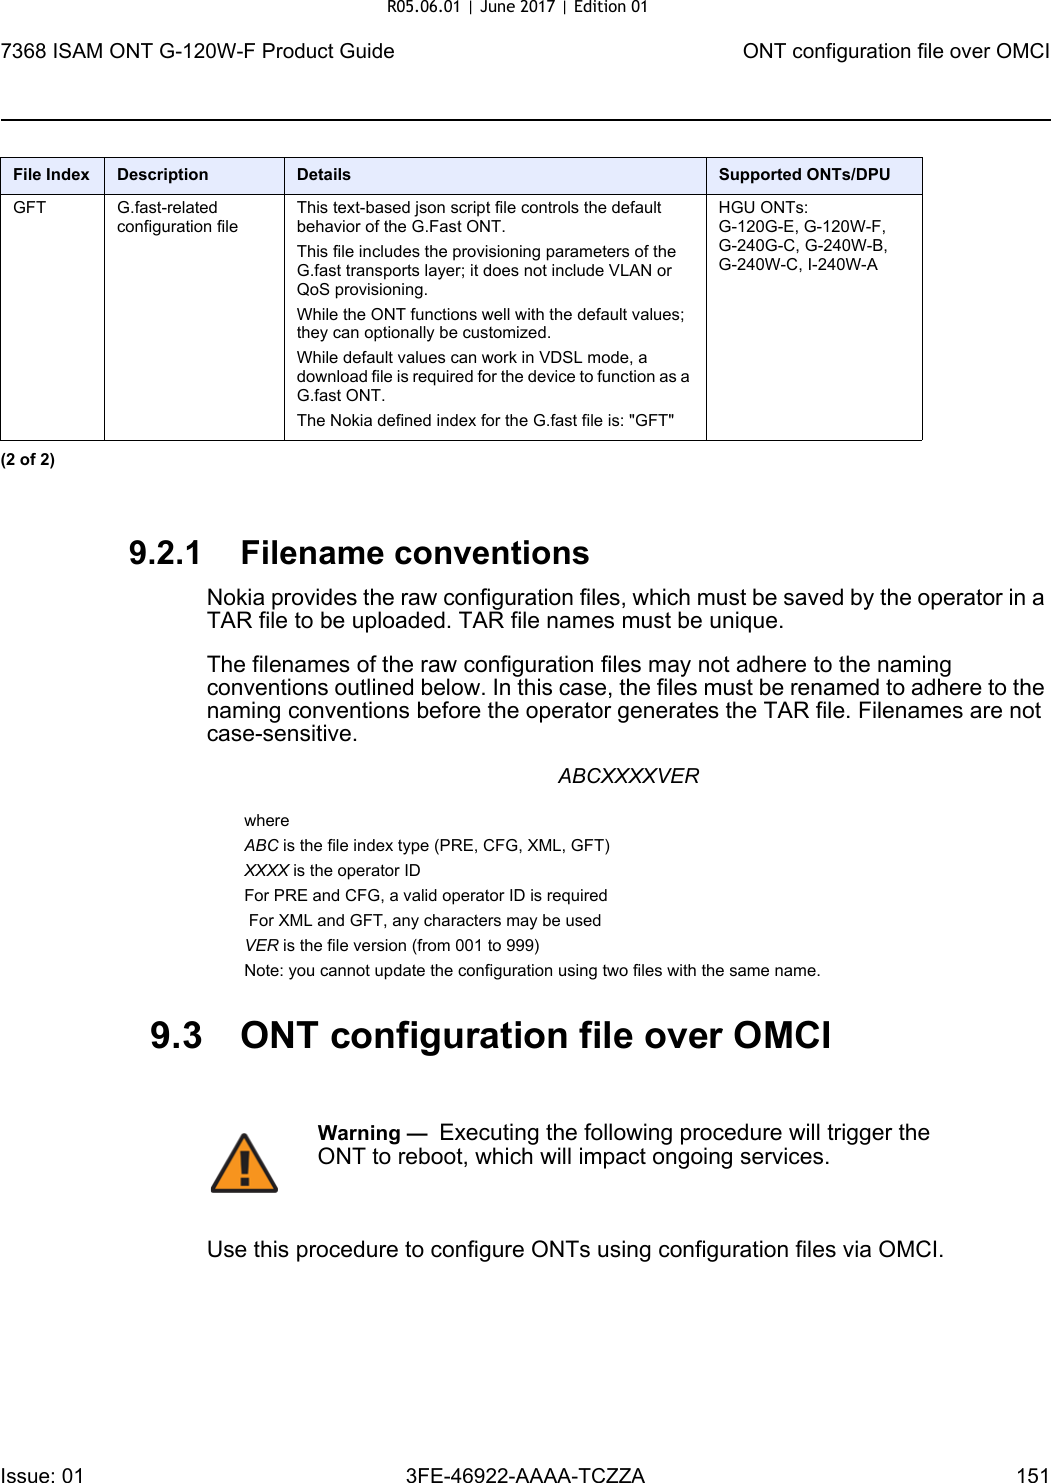 7368 ISAM ONT G-120W-F Product Guide ONT configuration file over OMCIIssue: 01 3FE-46922-AAAA-TCZZA 151 9.2.1 Filename conventionsNokia provides the raw configuration files, which must be saved by the operator in a TAR file to be uploaded. TAR file names must be unique.The filenames of the raw configuration files may not adhere to the naming conventions outlined below. In this case, the files must be renamed to adhere to the naming conventions before the operator generates the TAR file. Filenames are not case-sensitive.ABCXXXXVERwhereABC is the file index type (PRE, CFG, XML, GFT)XXXX is the operator IDFor PRE and CFG, a valid operator ID is required For XML and GFT, any characters may be usedVER is the file version (from 001 to 999) Note: you cannot update the configuration using two files with the same name.9.3 ONT configuration file over OMCIUse this procedure to configure ONTs using configuration files via OMCI.GFT G.fast-related configuration fileThis text-based json script file controls the default behavior of the G.Fast ONT. This file includes the provisioning parameters of the G.fast transports layer; it does not include VLAN or QoS provisioning. While the ONT functions well with the default values; they can optionally be customized. While default values can work in VDSL mode, a download file is required for the device to function as a G.fast ONT.The Nokia defined index for the G.fast file is: &quot;GFT&quot;HGU ONTs:G-120G-E, G-120W-F, G-240G-C, G-240W-B, G-240W-C, I-240W-AFile Index Description Details Supported ONTs/DPU(2 of 2)Warning —  Executing the following procedure will trigger the ONT to reboot, which will impact ongoing services.R05.06.01 | June 2017 | Edition 01 